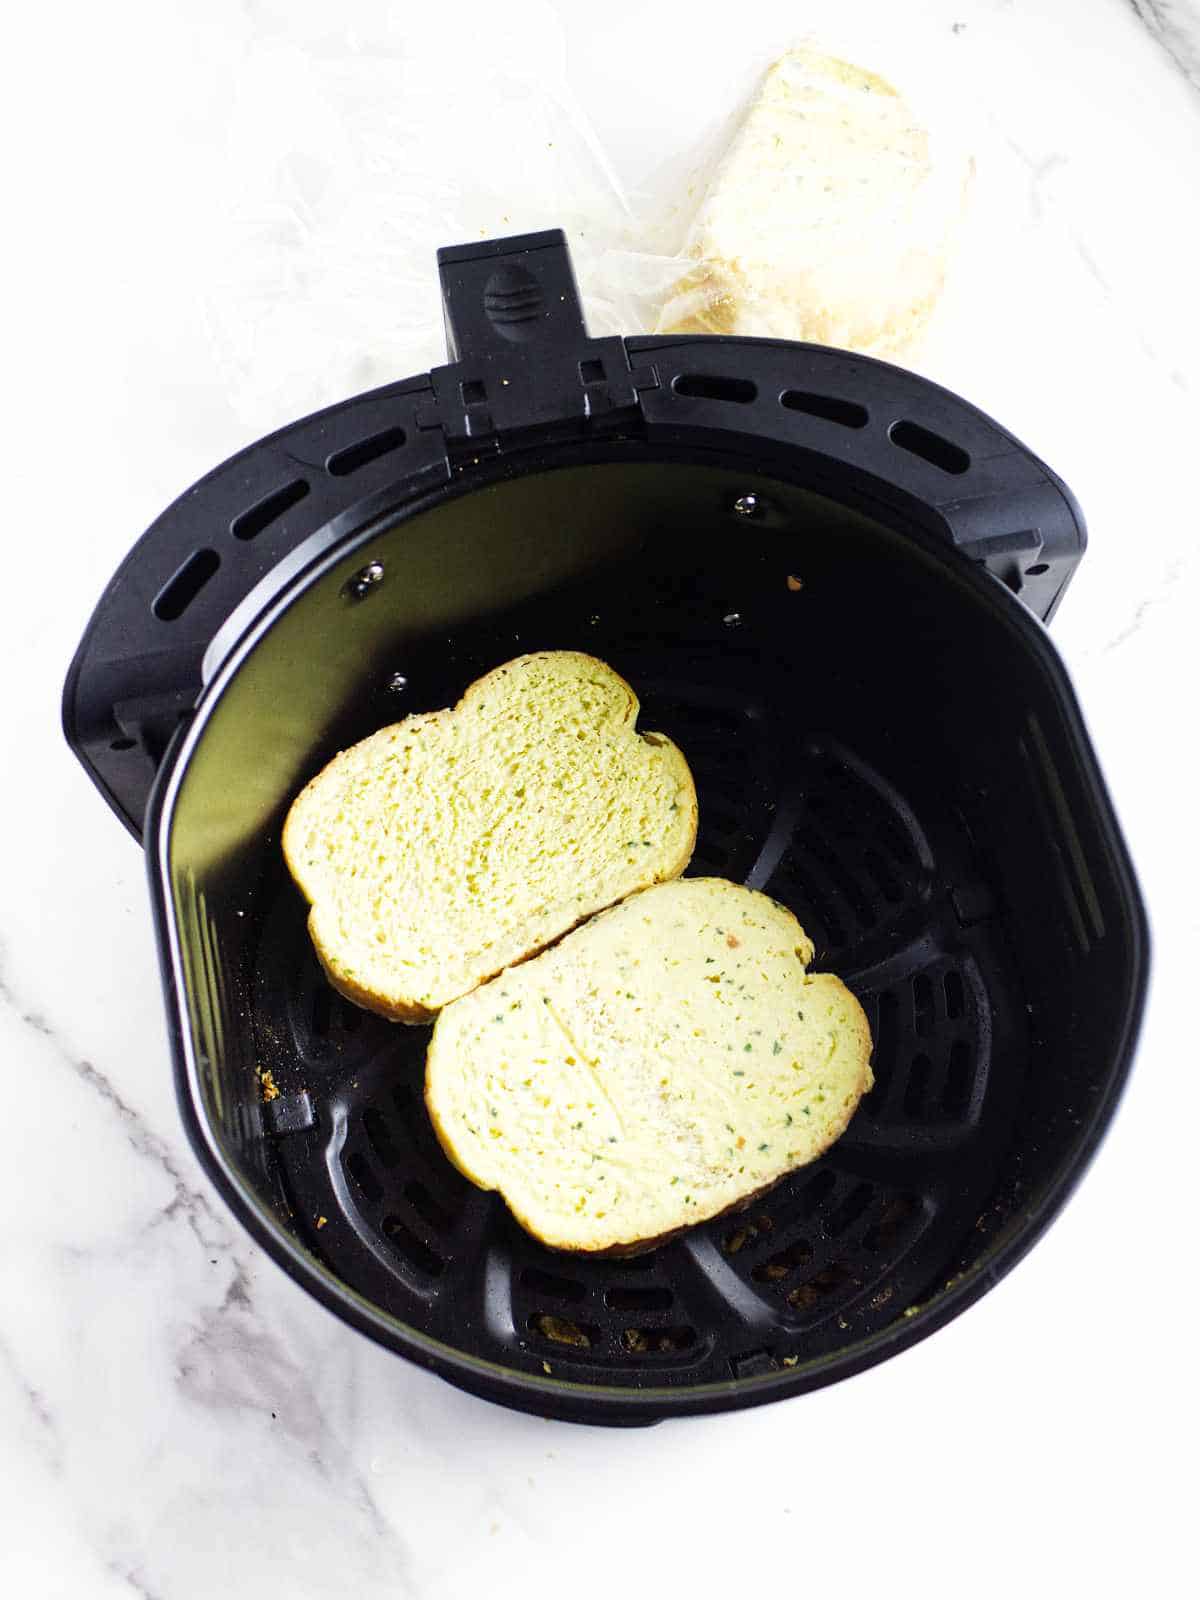 frozen buttered Texas Toast spread out in an airfryer basket.